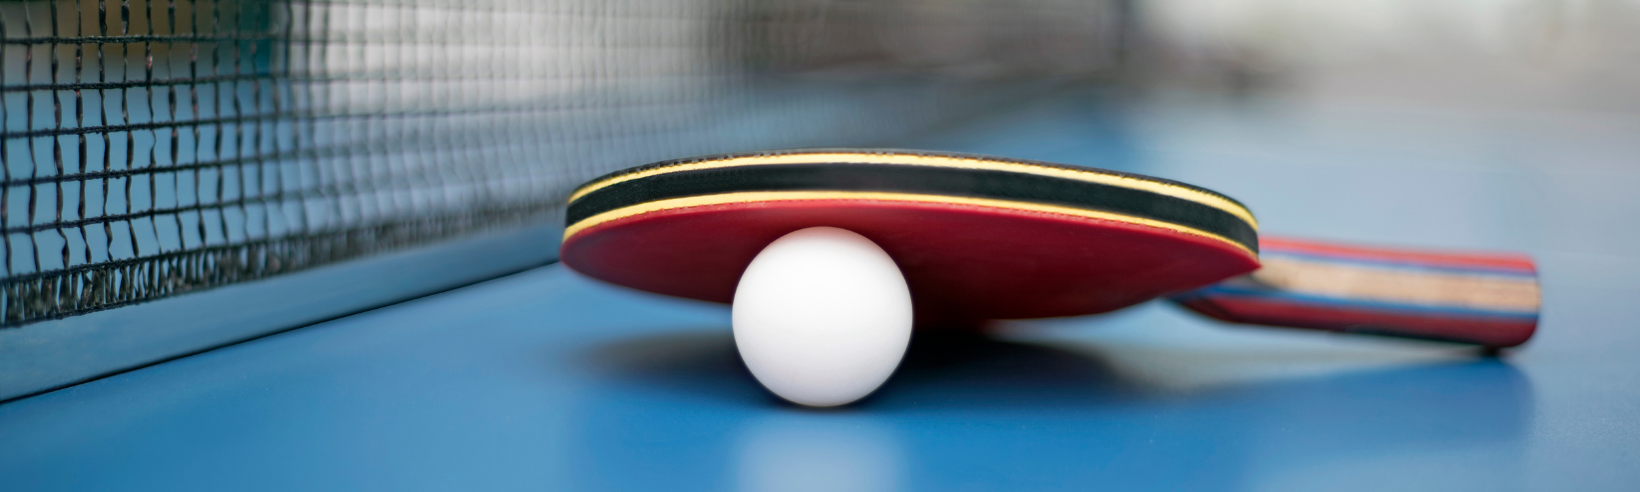 Table Tennis ball and racquet